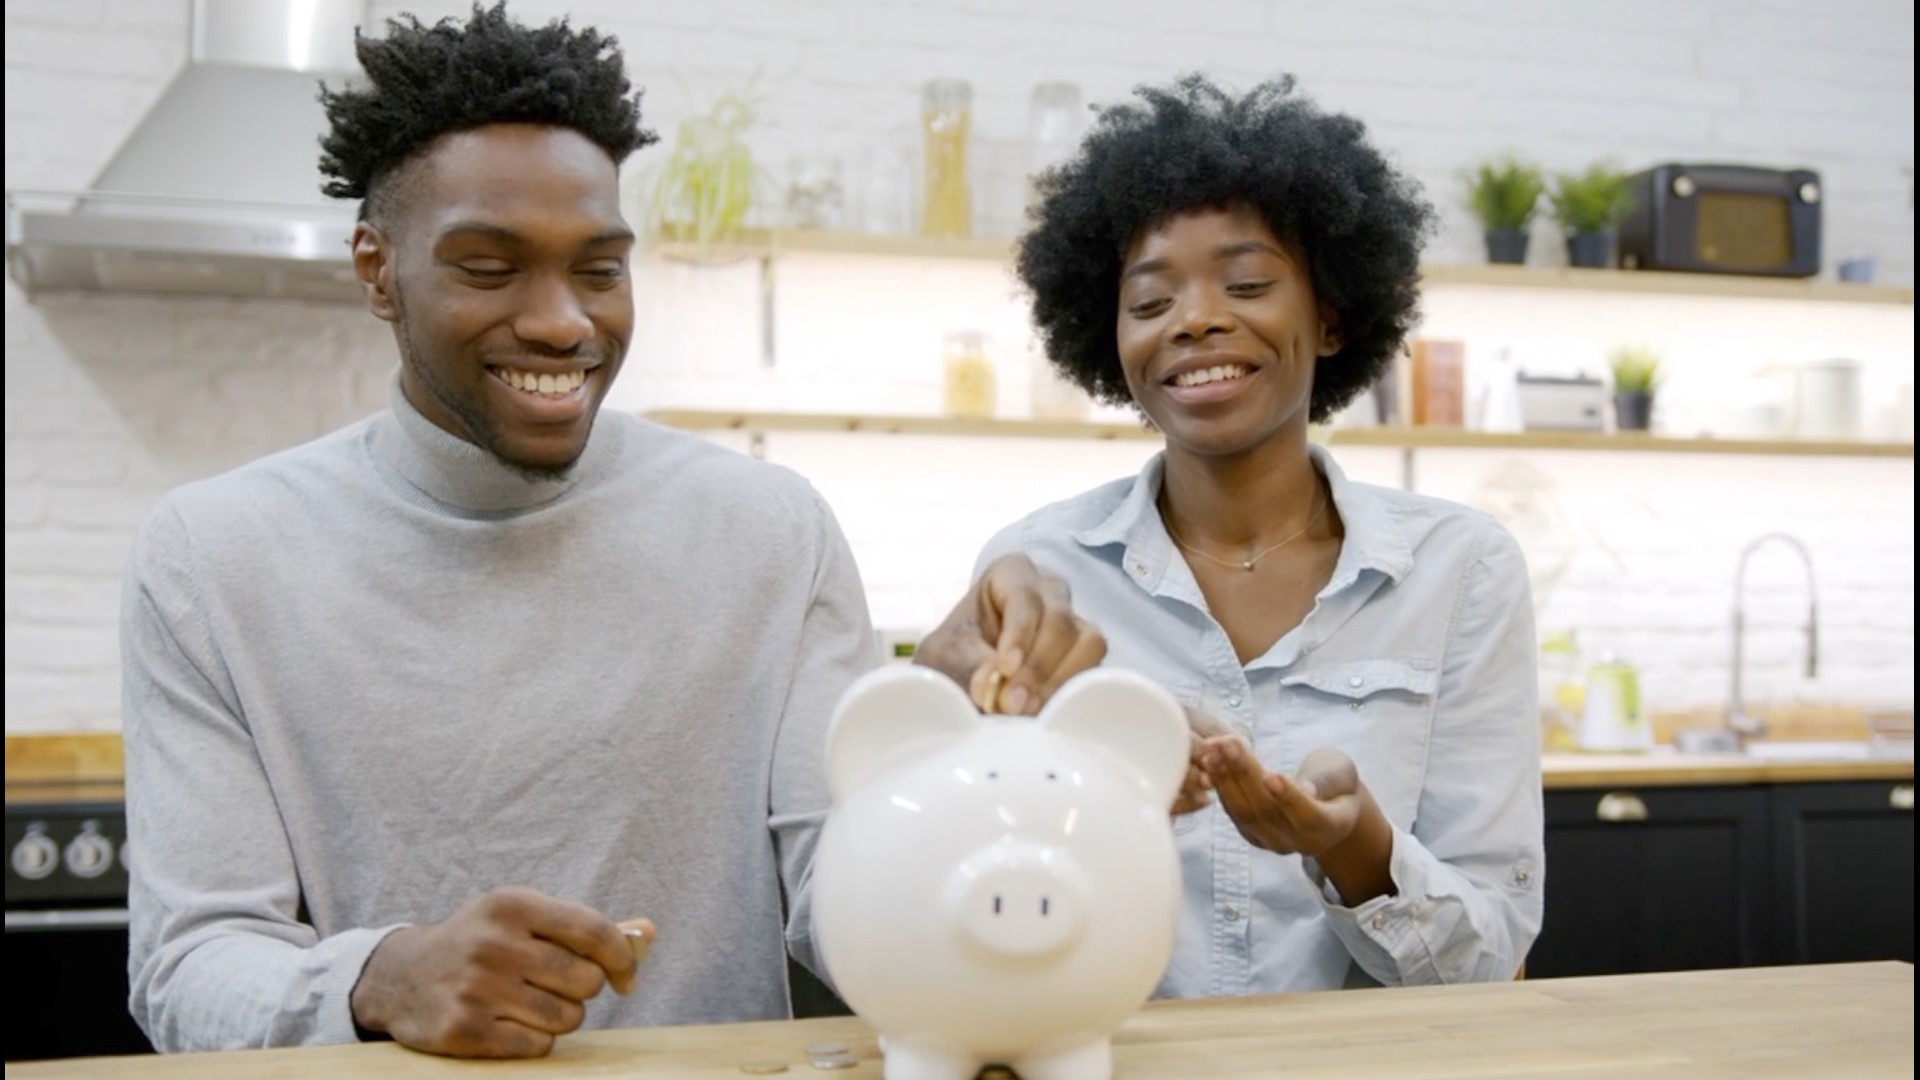 Grow your COVID piggy bank with all the pennies you're saving from following these tips! 
Veuer's Chloe Hurst has the story!